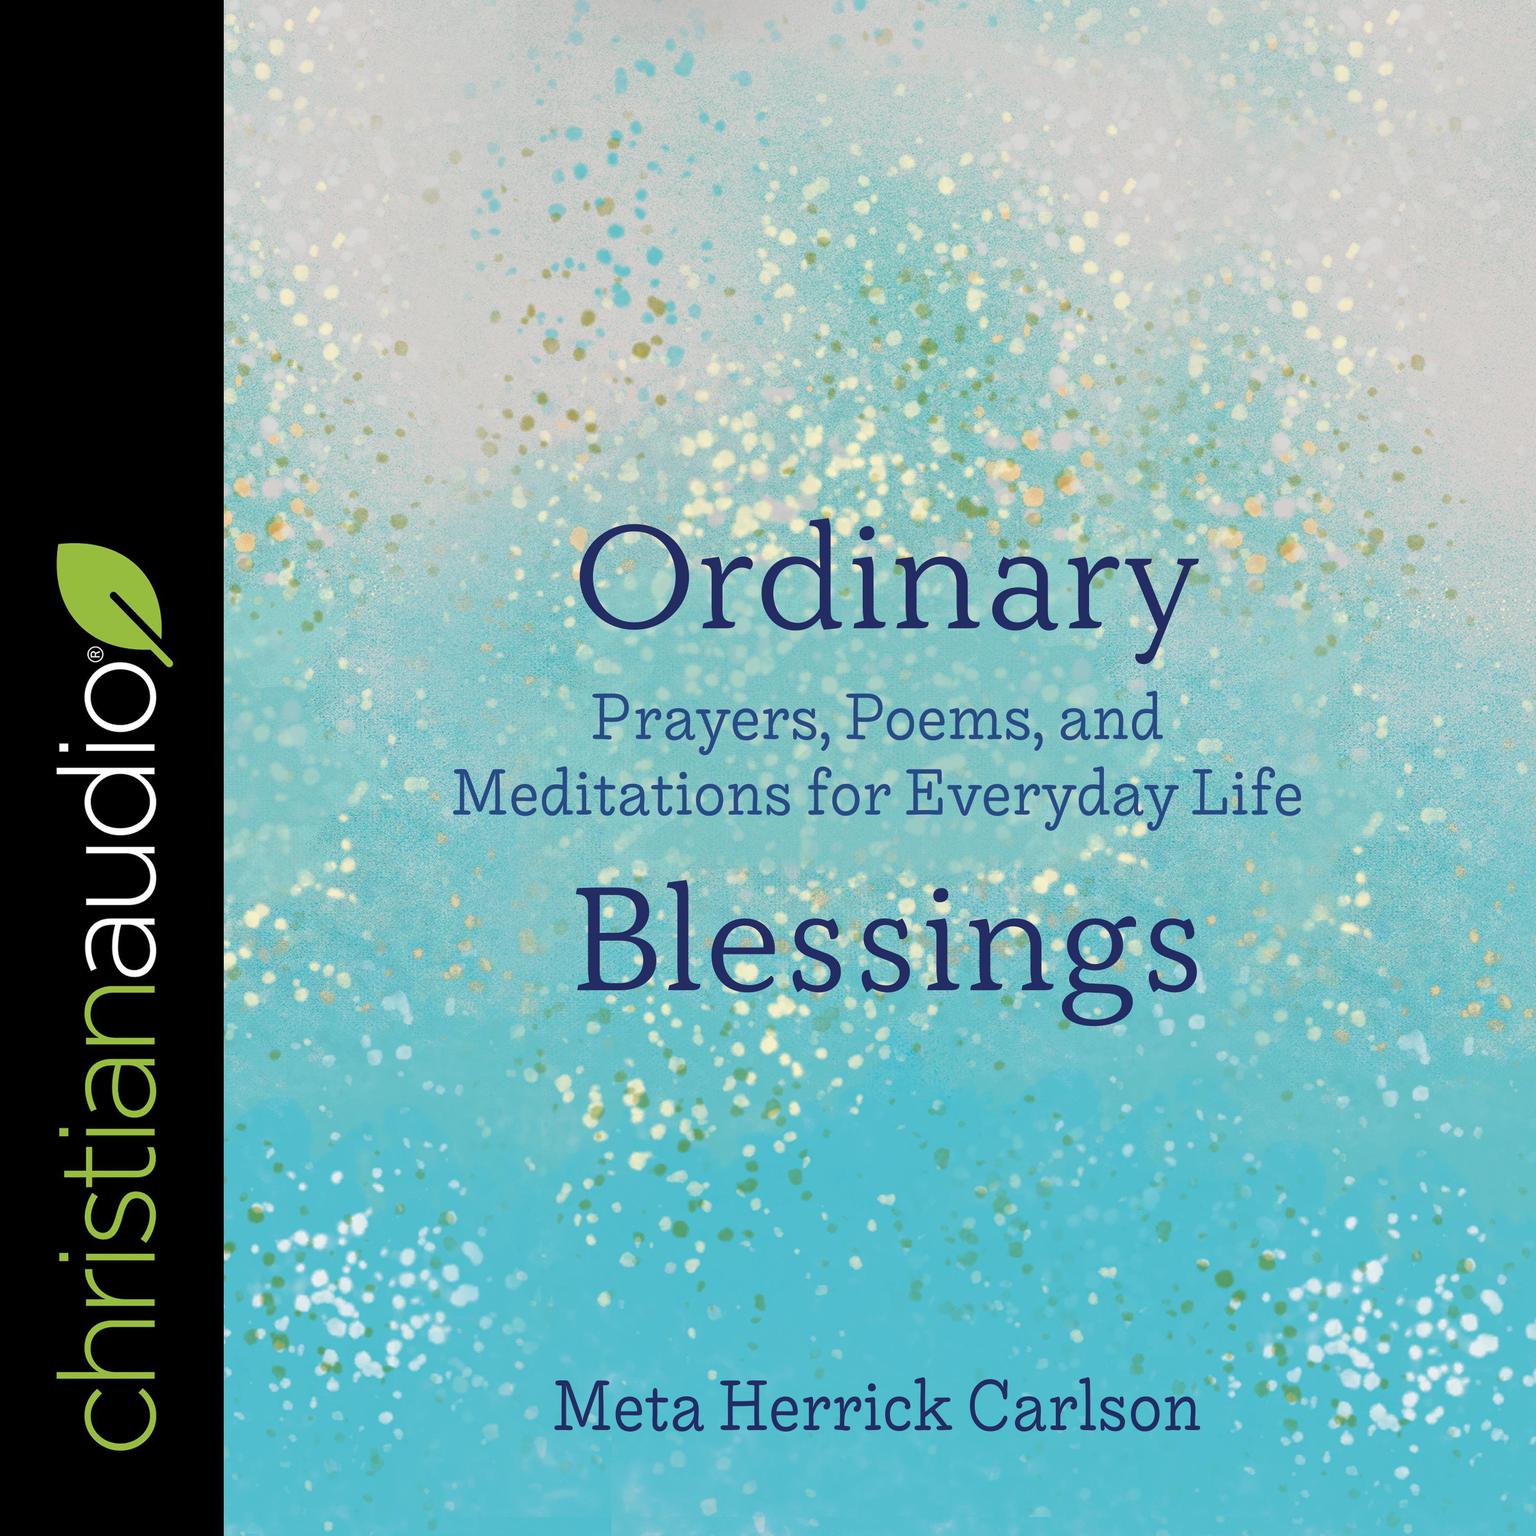 Ordinary Blessings: Prayers, Poems, and Meditations for Everyday Life Audiobook, by Meta Herrick Carlson